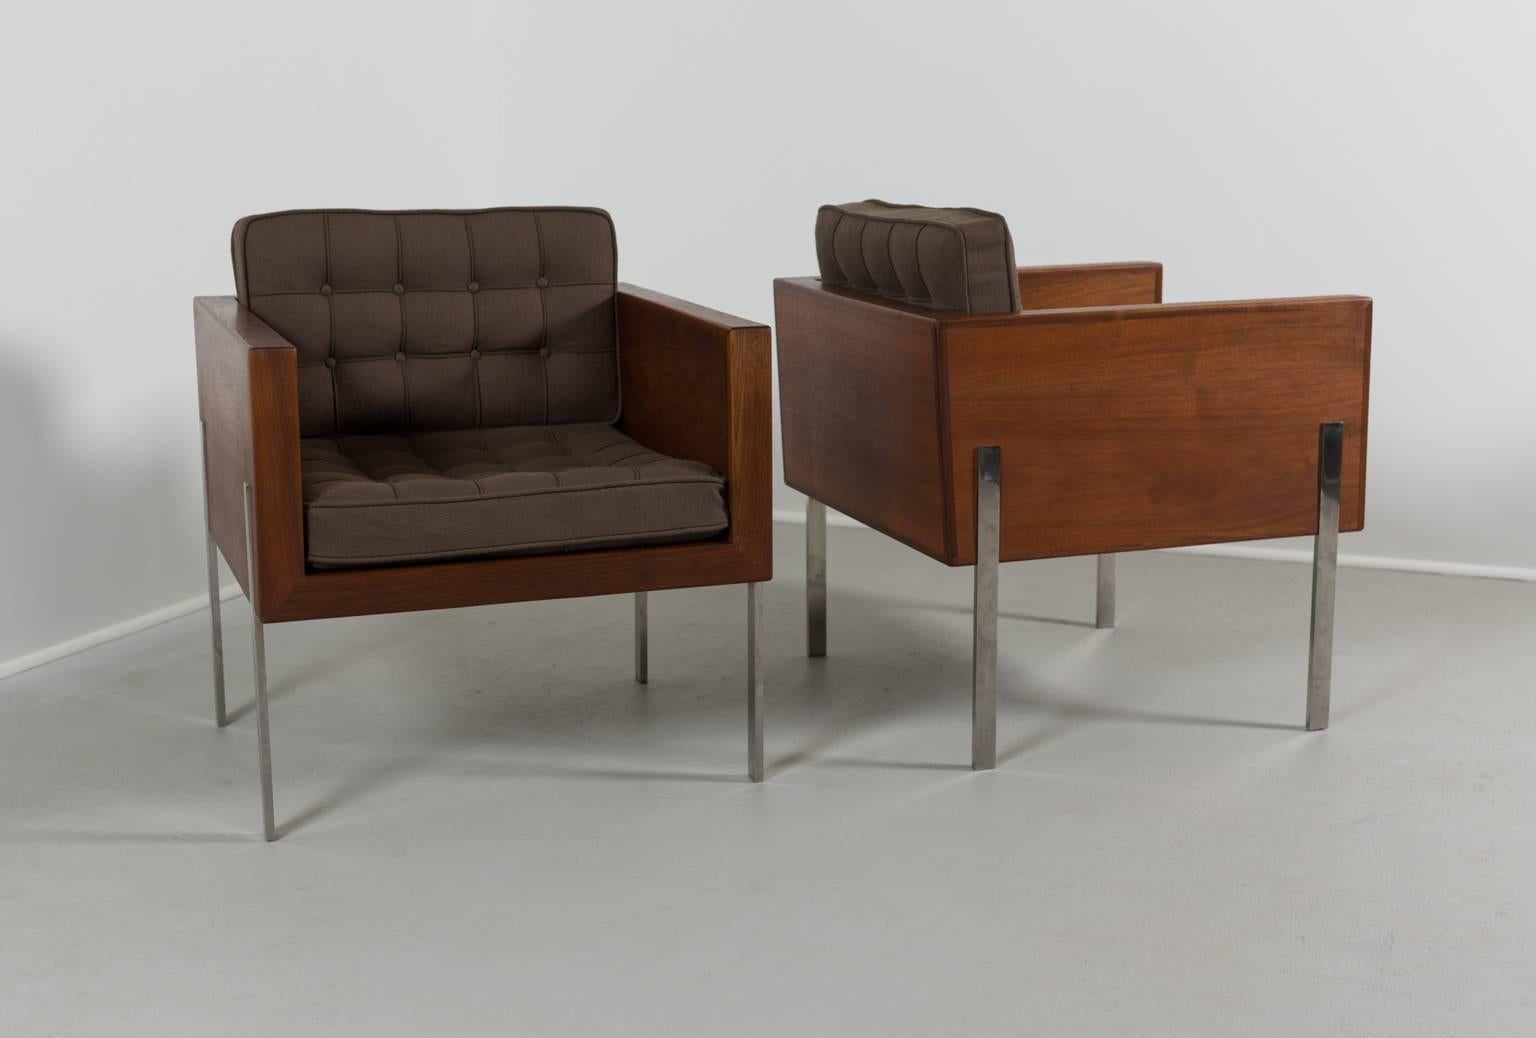 Pair of Harvey Probber chairs in walnut.

Architectural series, model #248.
USA, circa 1960.

Walnut, polished stainless steel, newly upholstered cushions/original down lining.